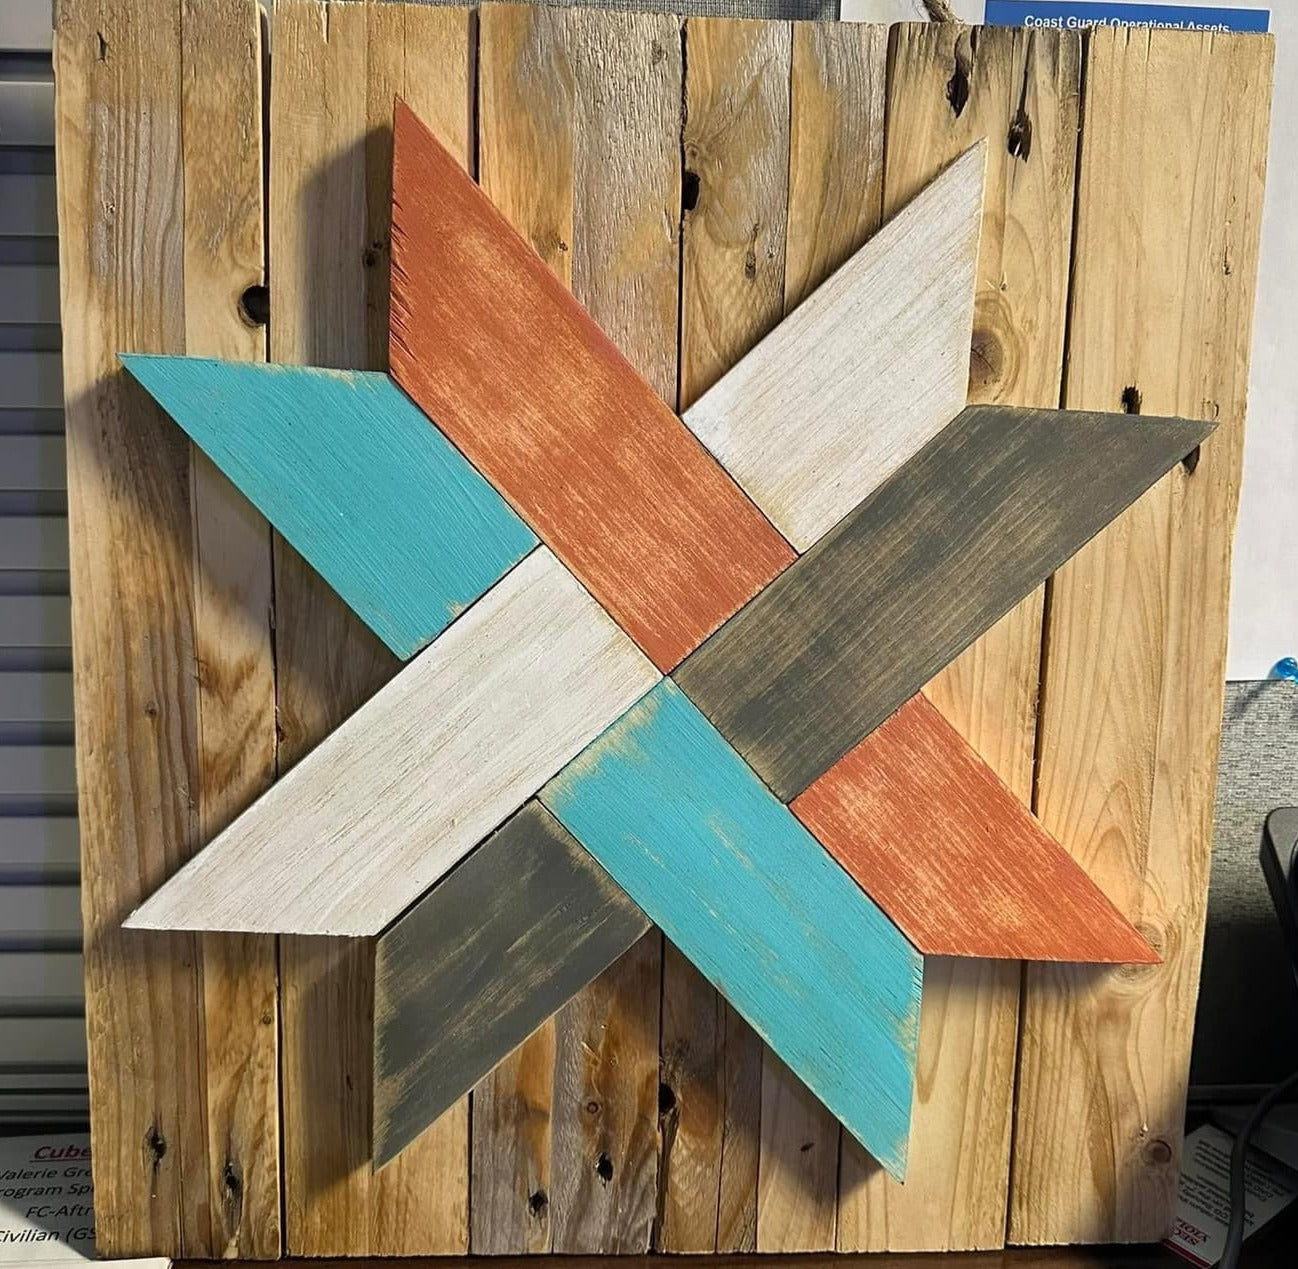 Rustic Barn Stars,  WoodQuilts and  More * Thur May 16th @ 6pm